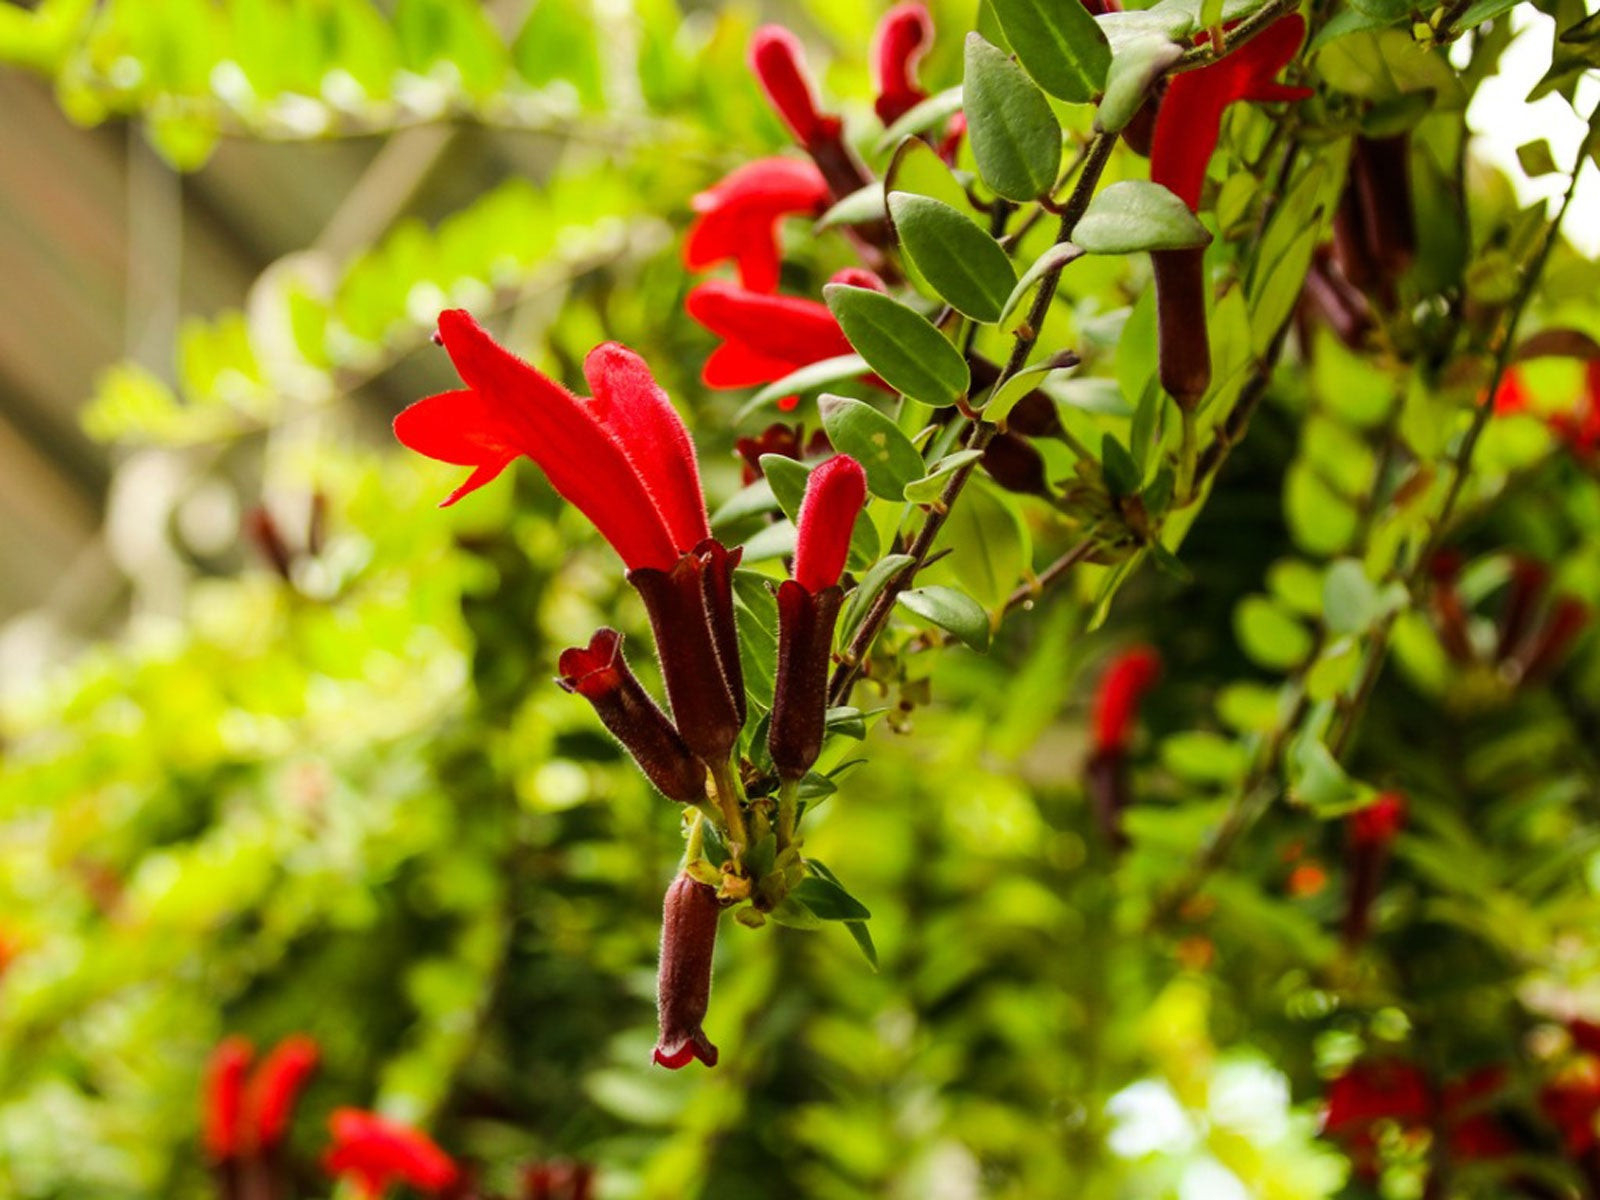 Aeschynanthus Lipstick Vine Info: How To Care For A Lipstick Plant